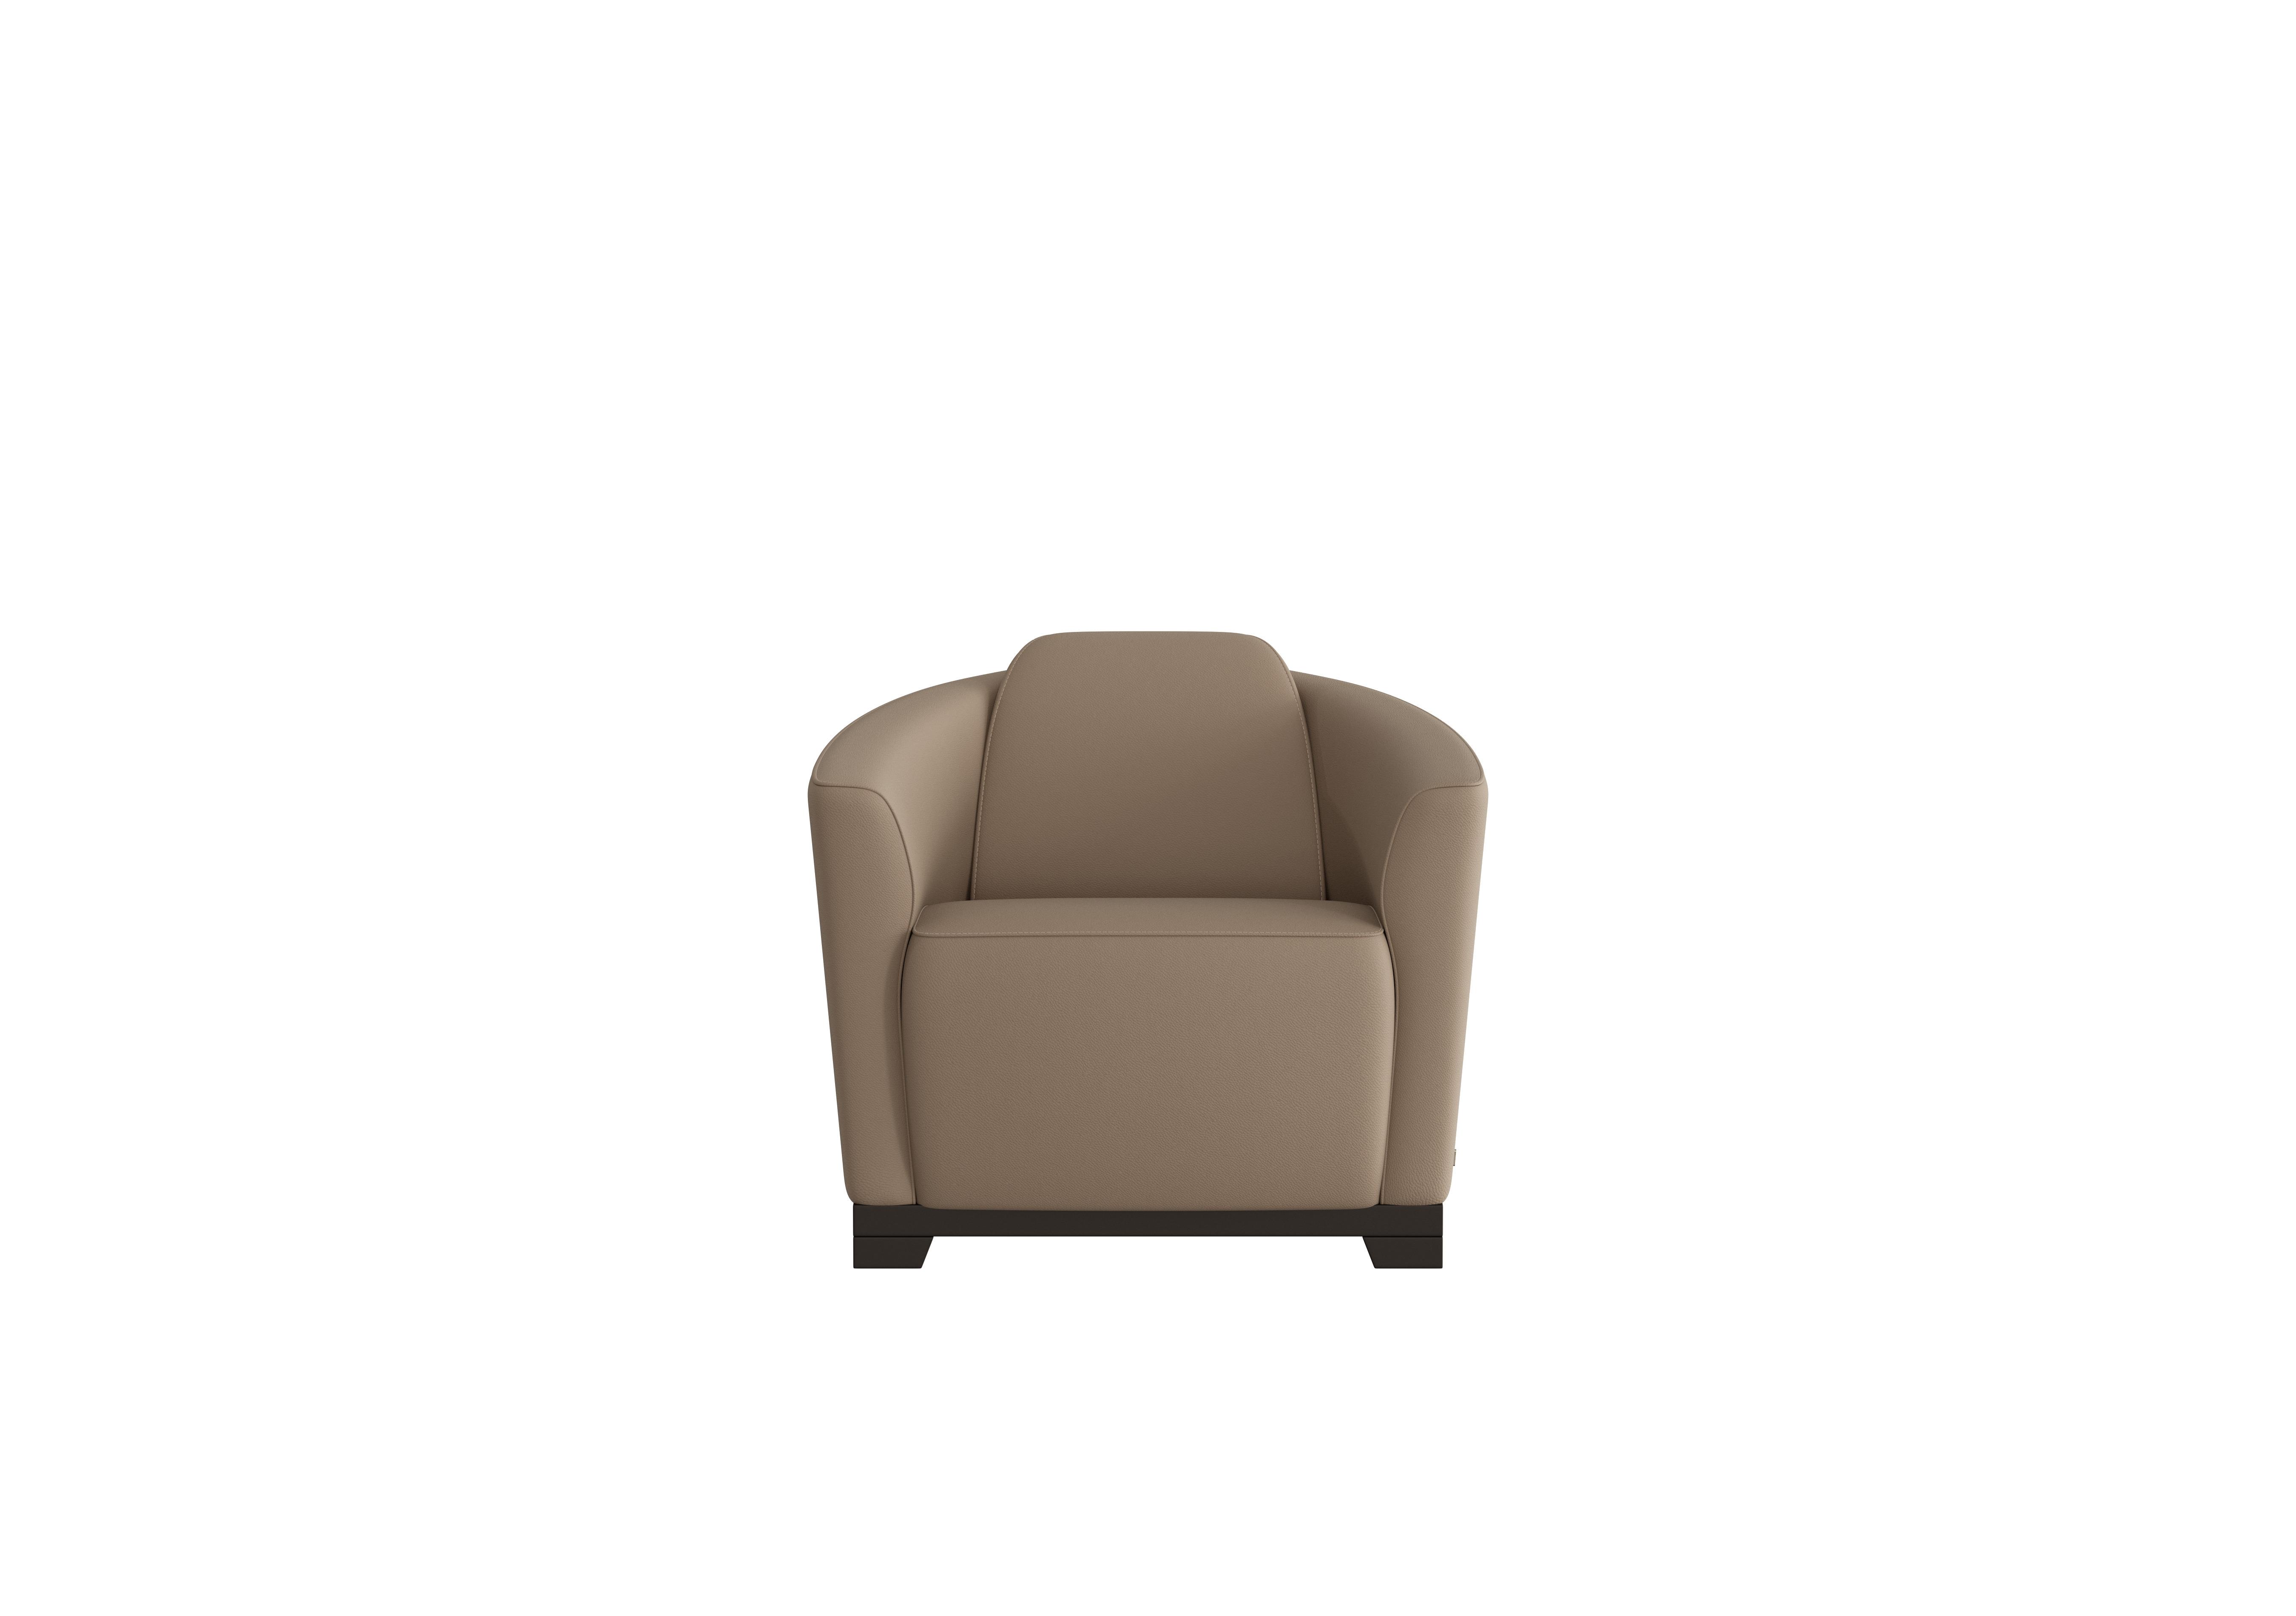 Ketty Leather Accent Chair in Torello Taupe 312 on Furniture Village